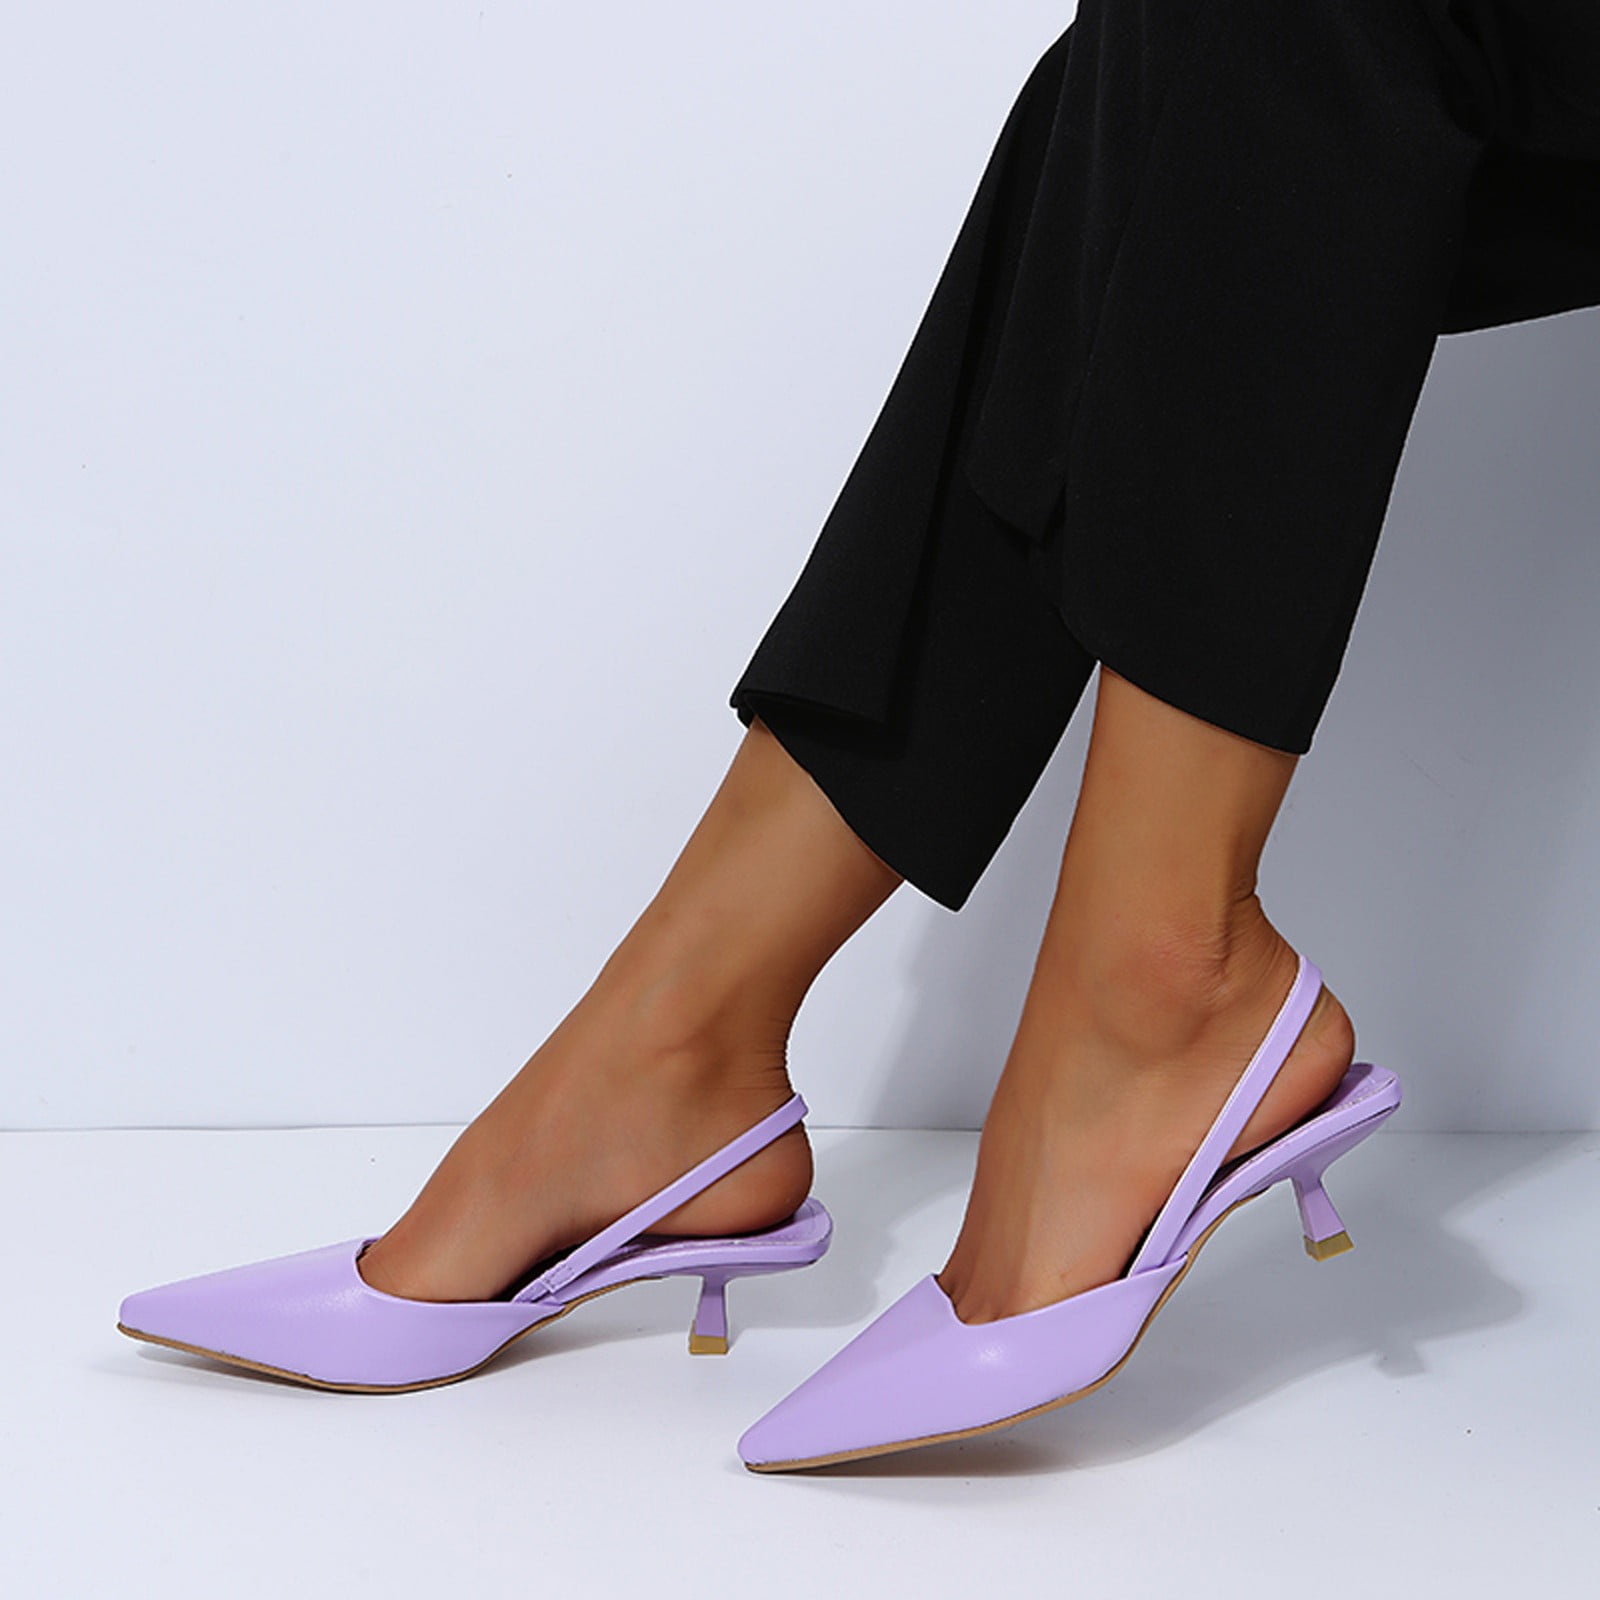 THERAPY SHOES | Eyeing platform heels 💌💫 Discover #FIERCE Black, Lilac  and White today..⁠ .⁠ .⁠ .⁠ .⁠ #shoesonline #therapyshoes #winter2... |  Instagram